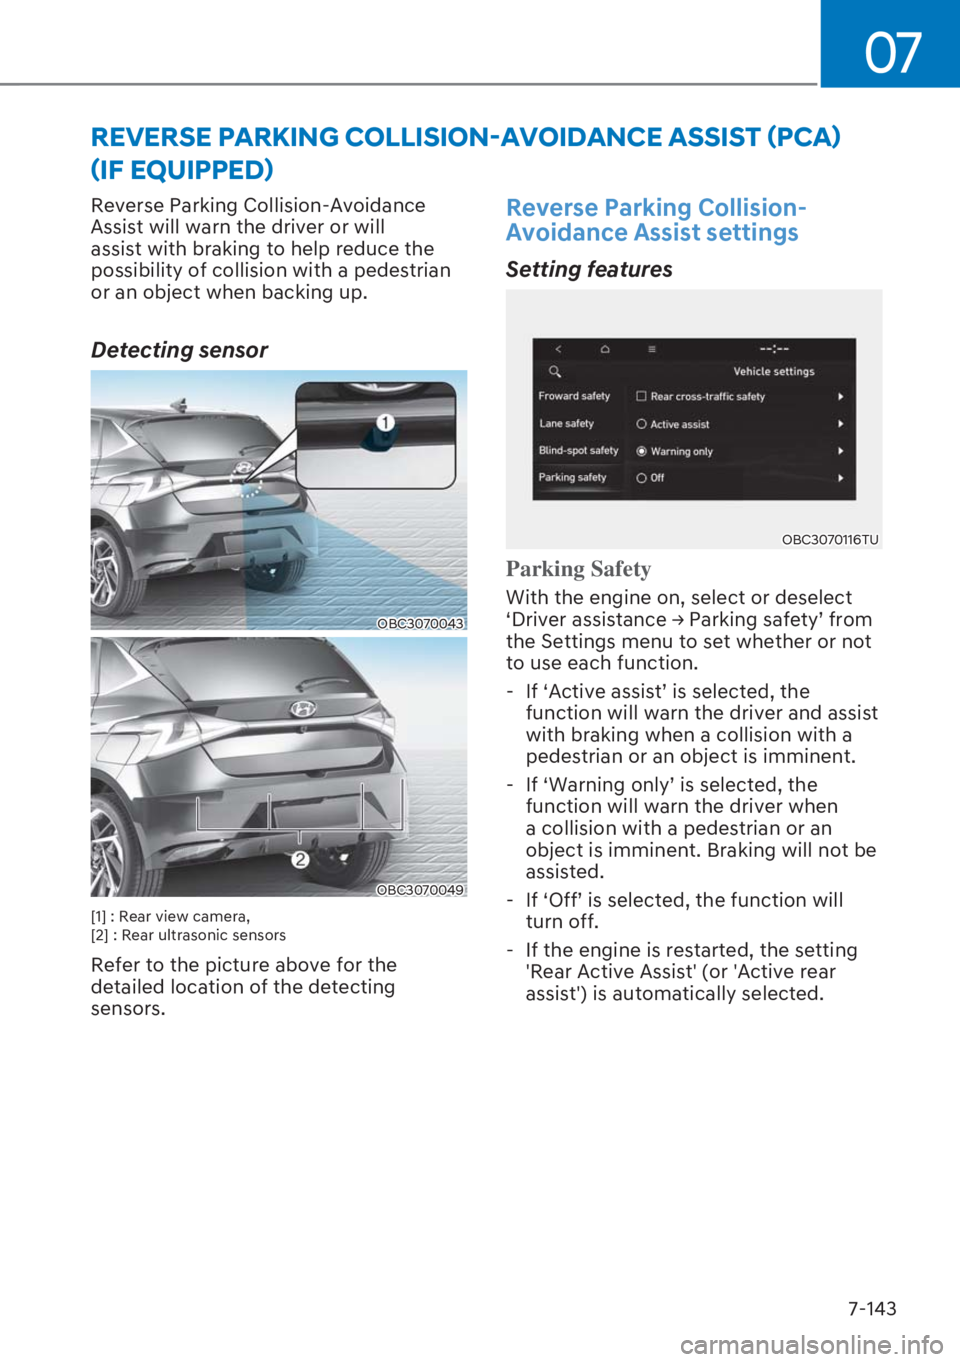 HYUNDAI I20 2023  Owners Manual 07
7-143 Reverse Parking Collision-Avoidance 
Assist will warn the driver or will 
assist with braking to help reduce the 
possibility of collision with a pedestrian 
or an object when backing up.
Det